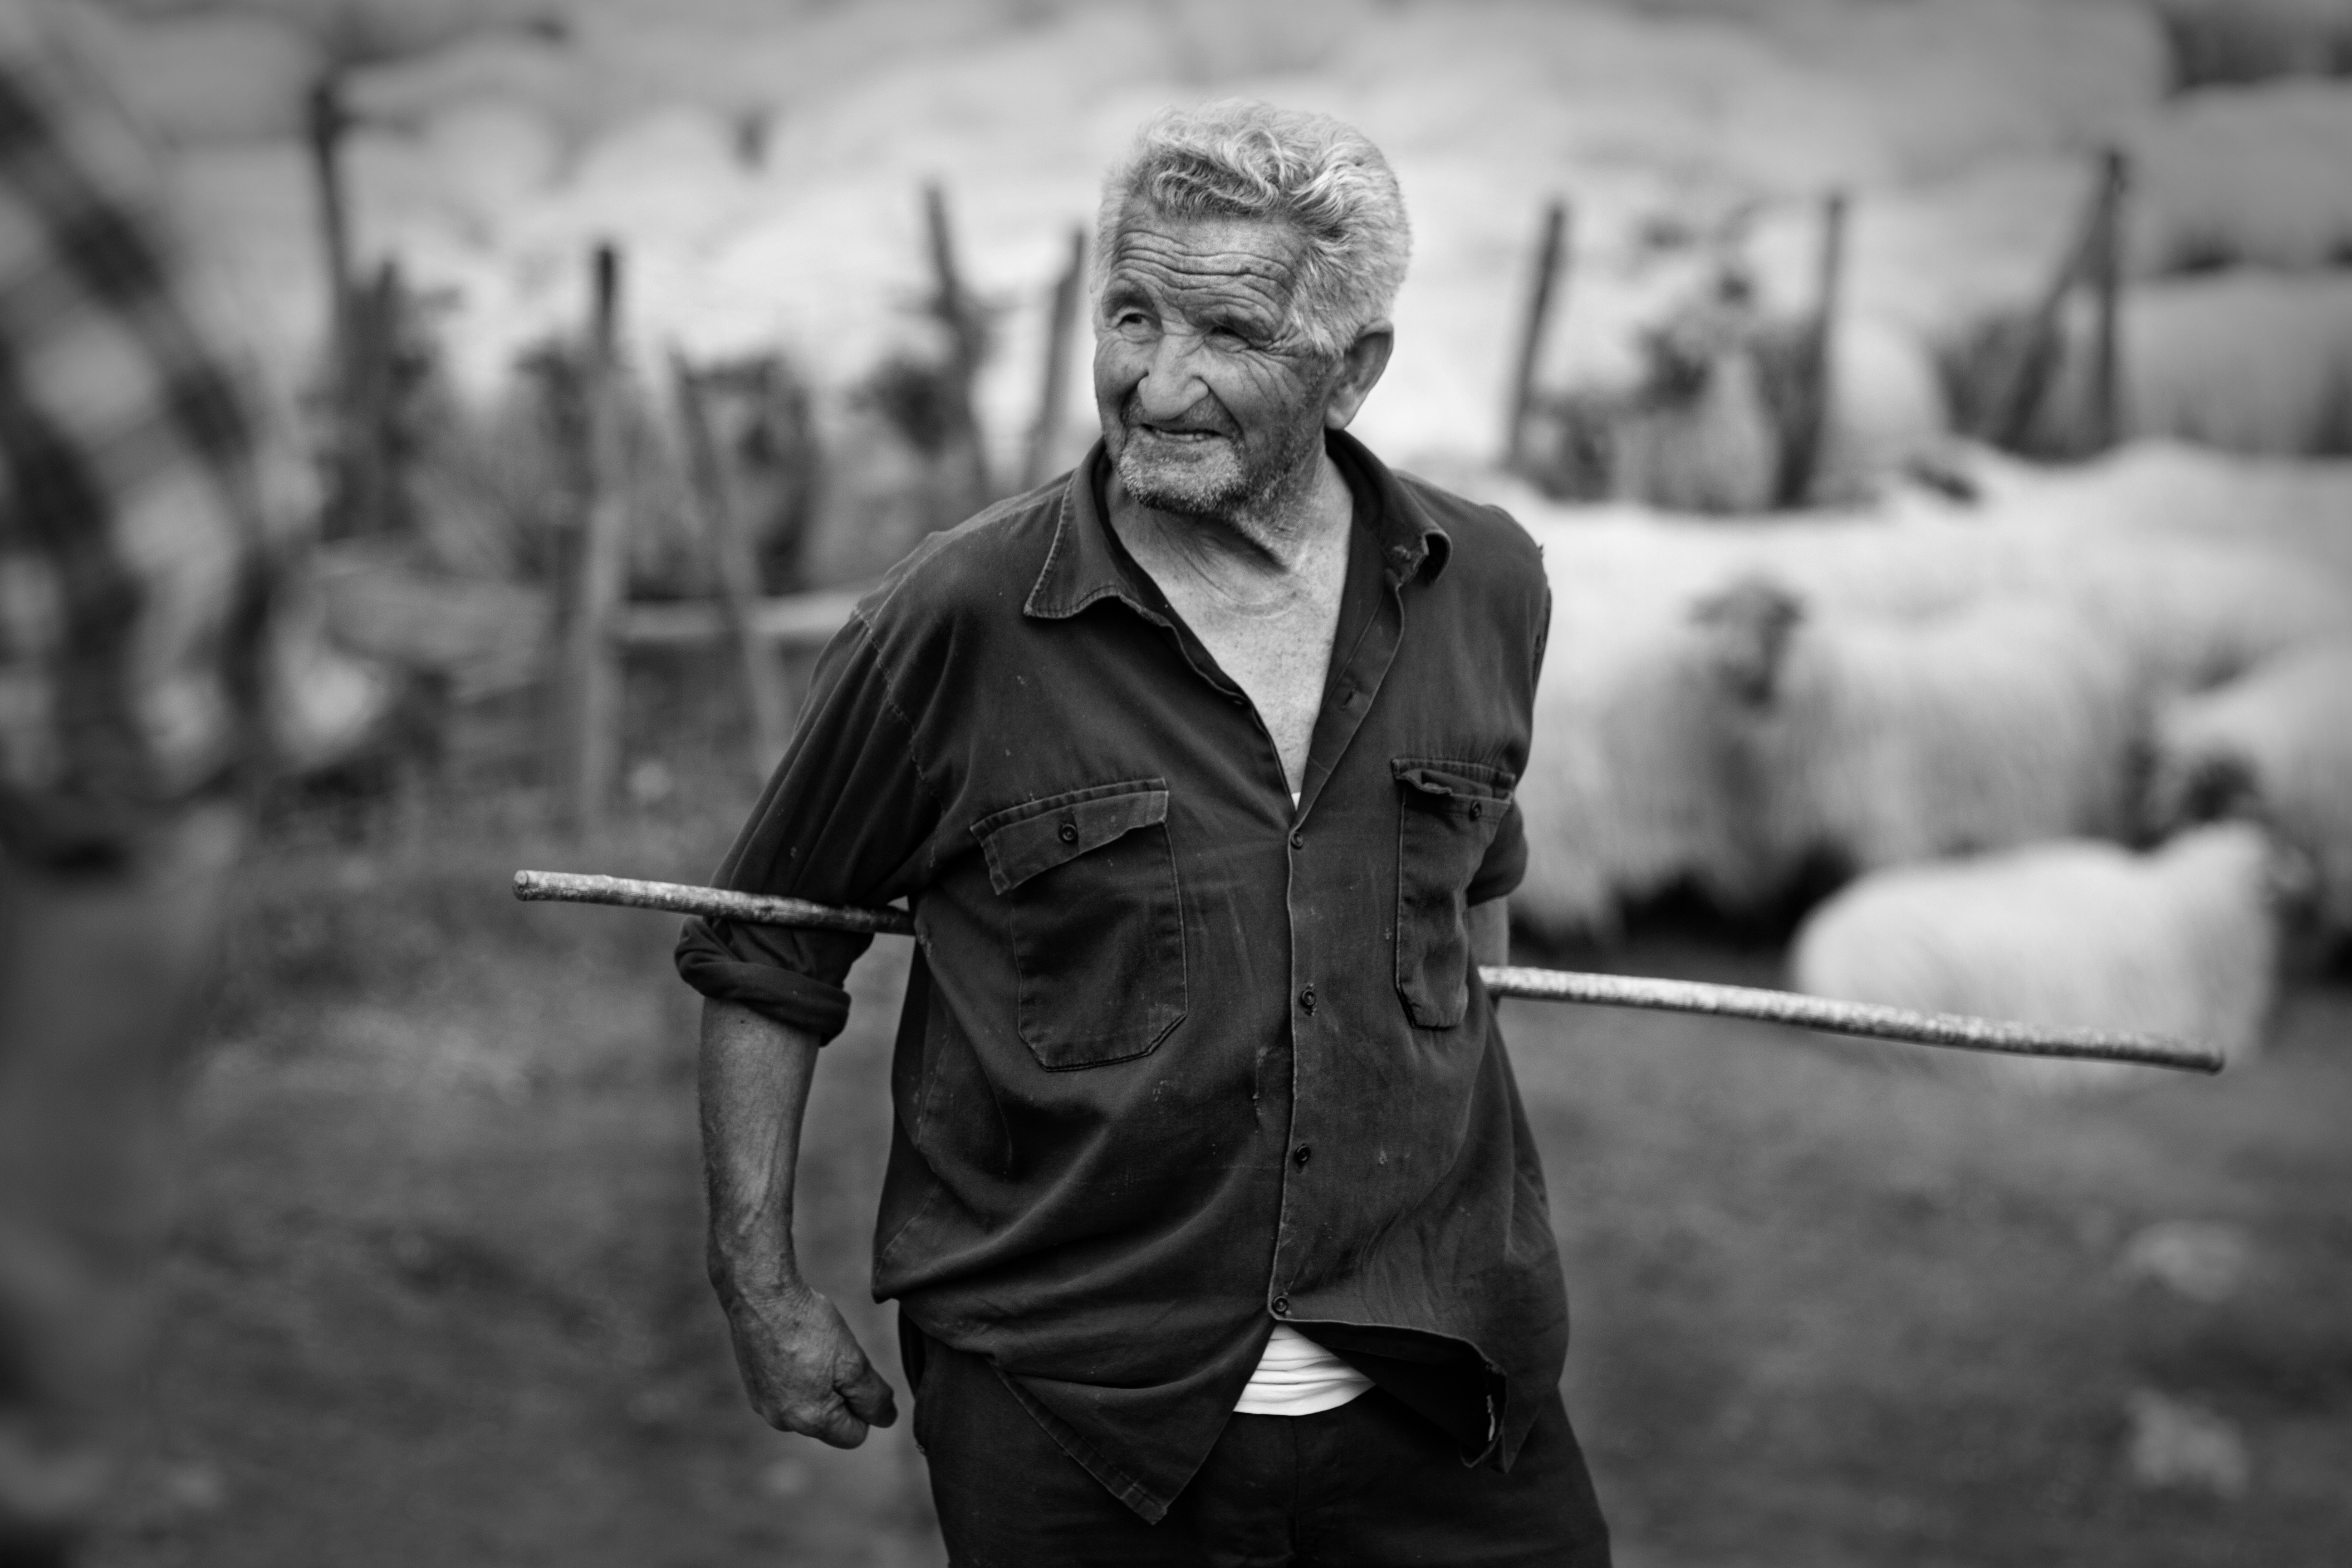 Still working: 78 years-old Luis Larrea is not retiring. He makes money selling of his 200 sheep-flock to a factory of Agurain (Basque Country).